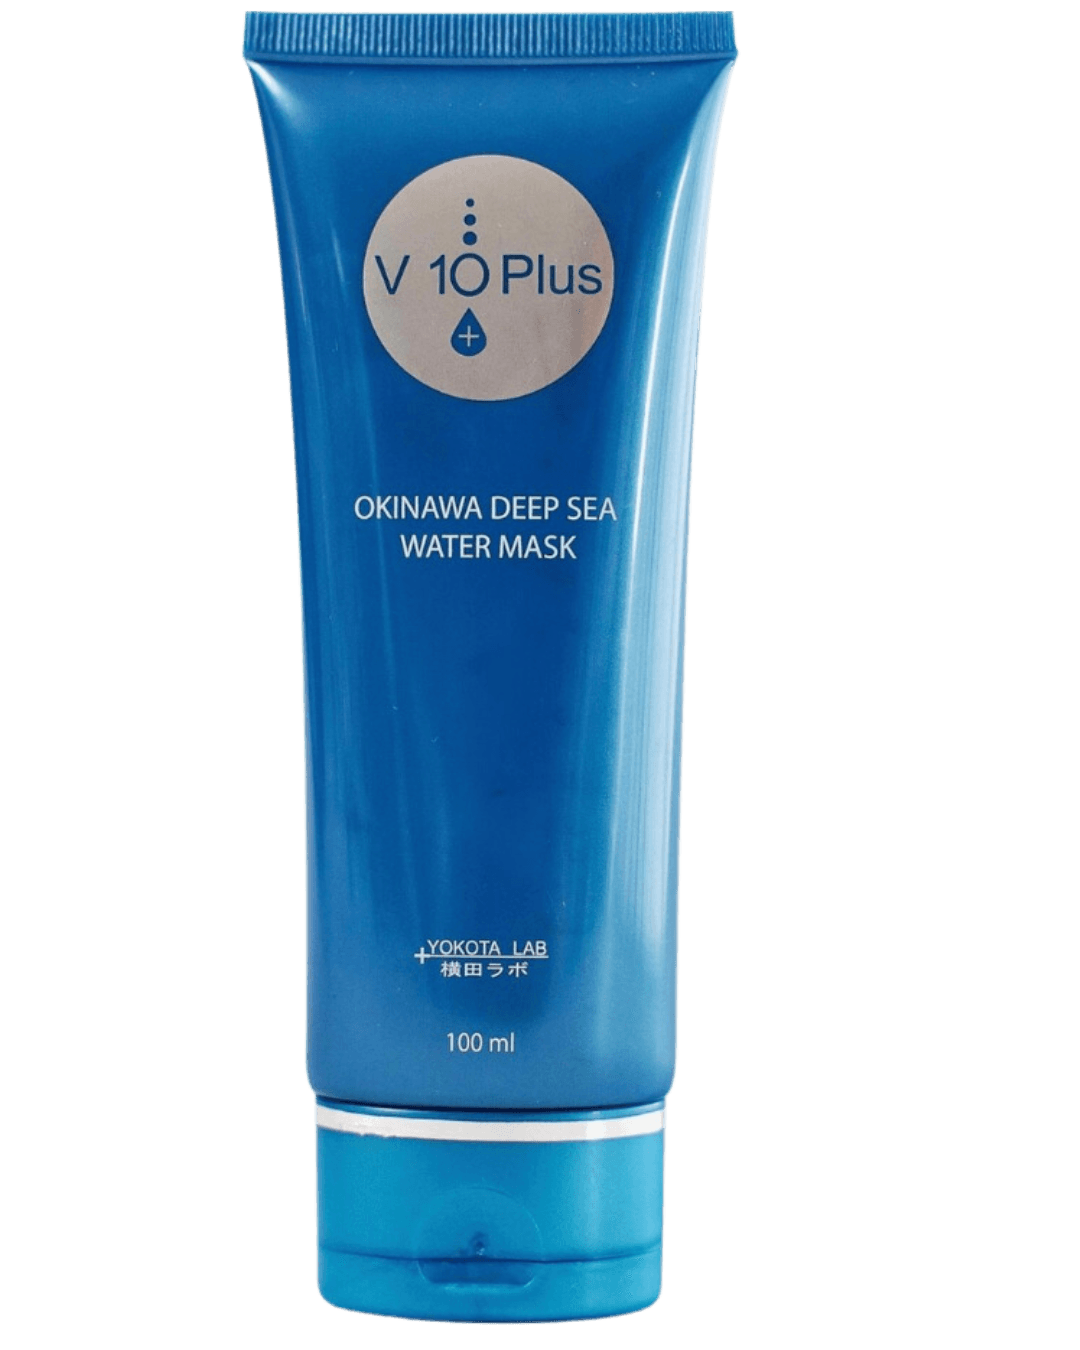 Daily Vanity Beauty Awards 2024 Best Skincare V 10 Plus Okinawa Deep Sea Water Mask Voted By Beauty Experts